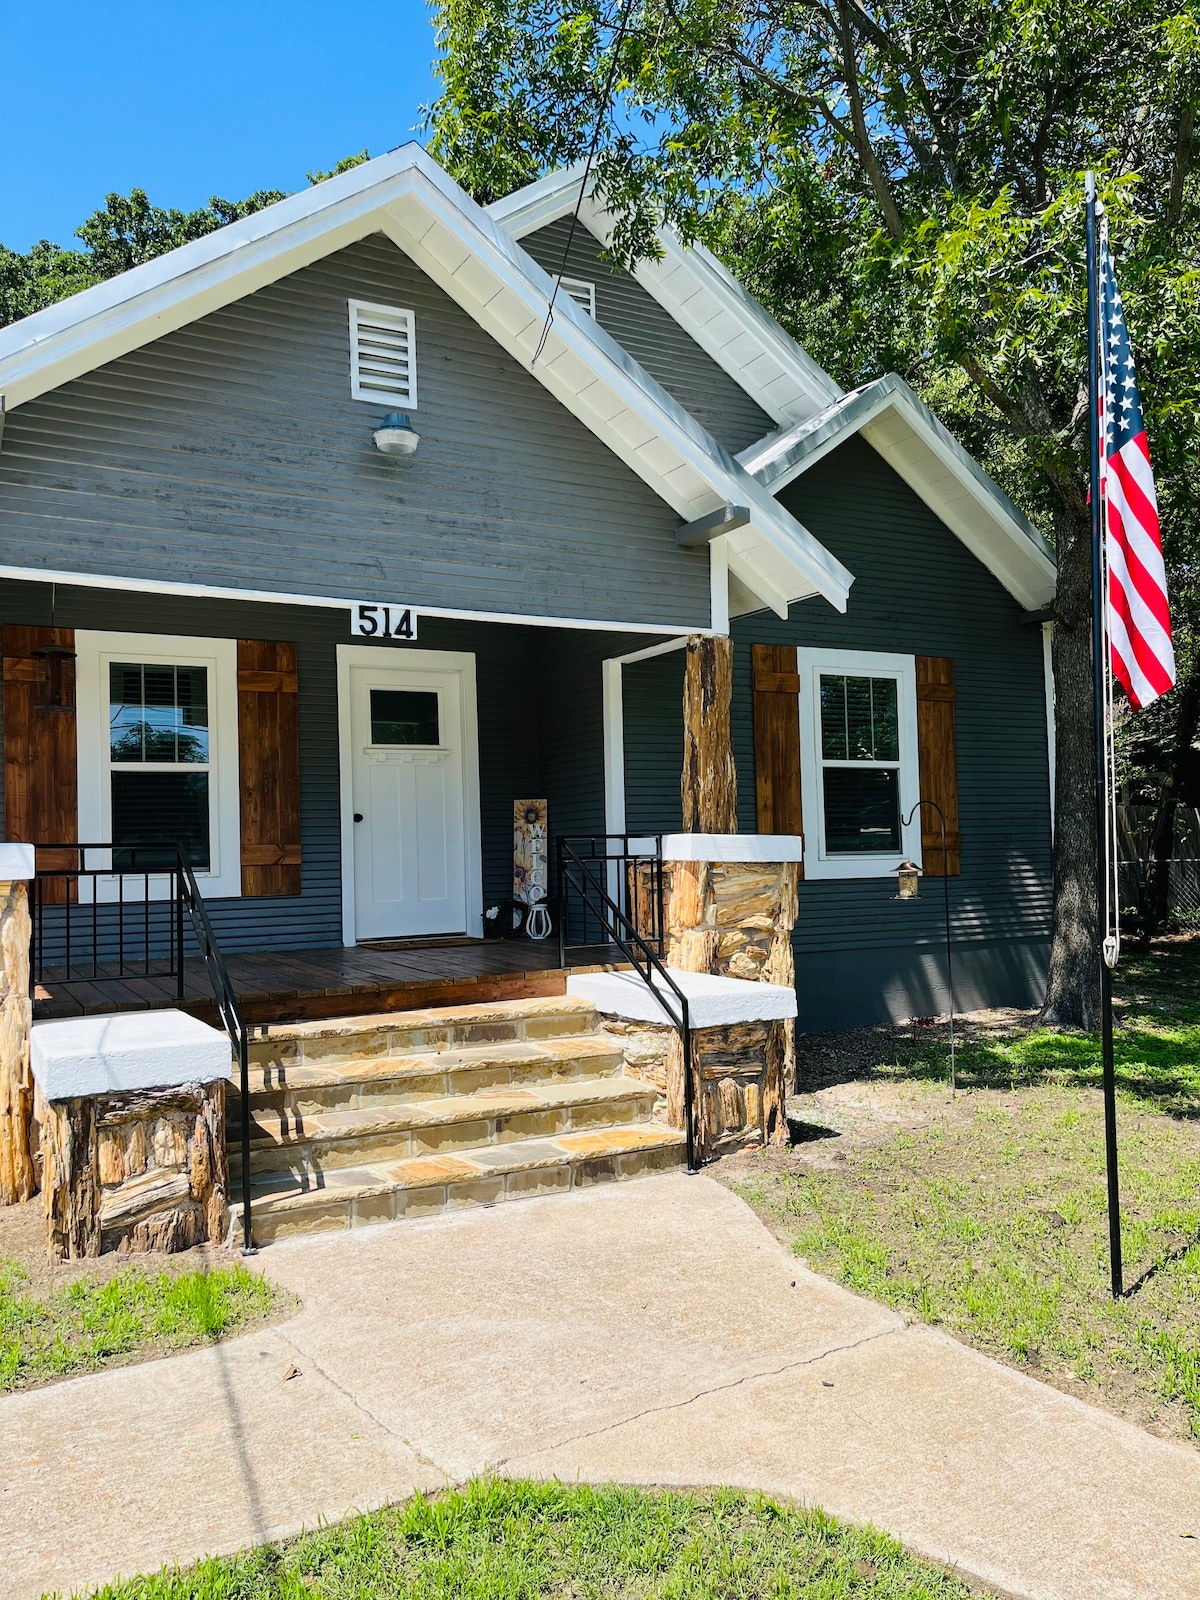 3 bedroom vacation home near downtown Wfd,Tx.